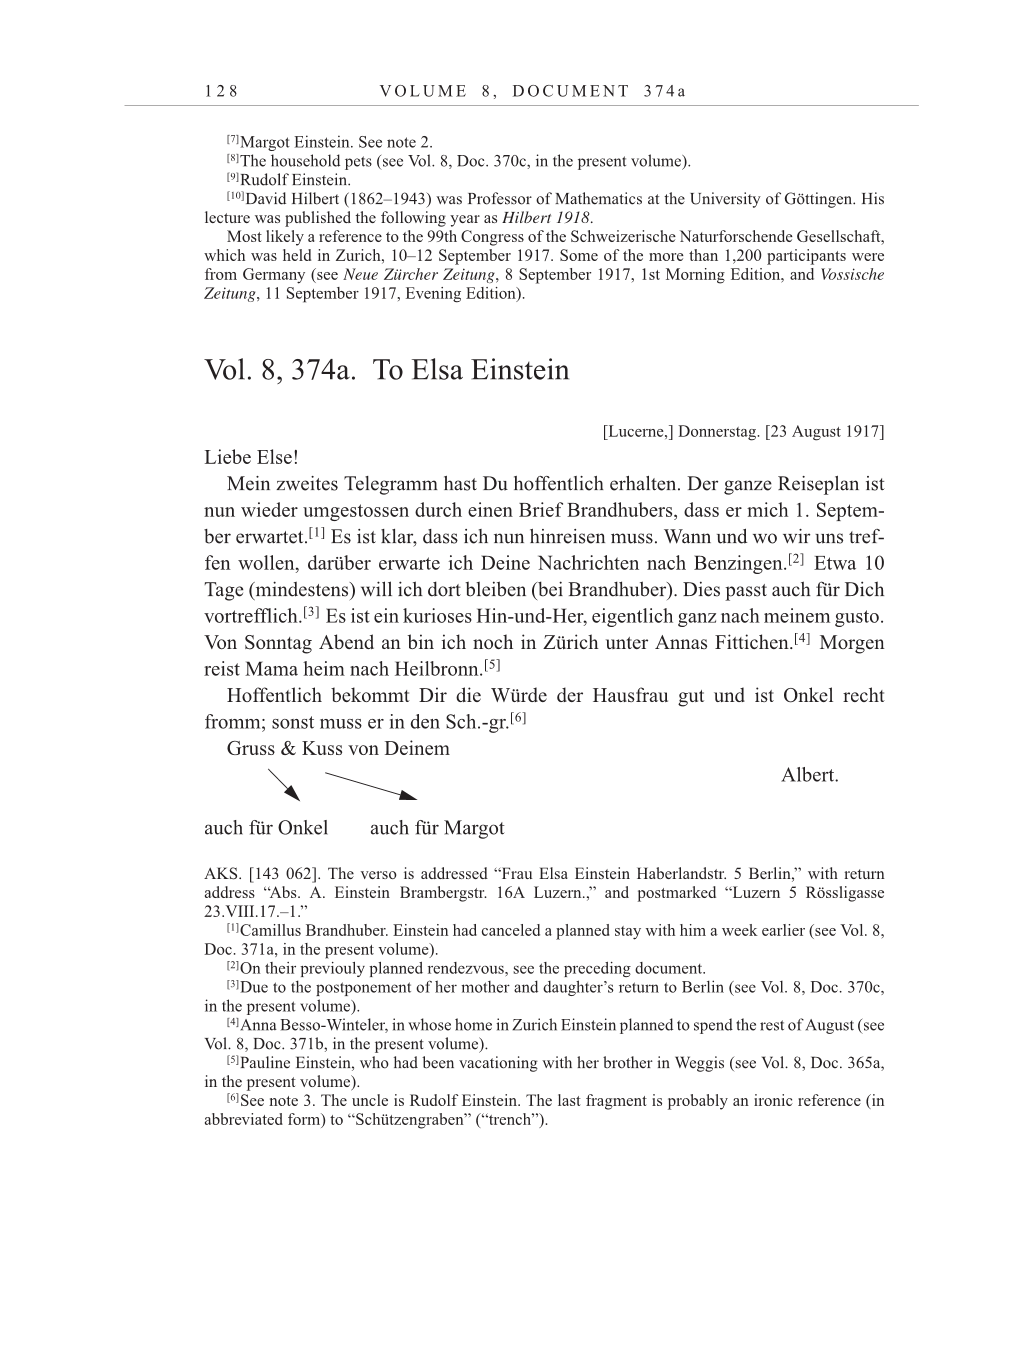 Volume 10: The Berlin Years: Correspondence May-December 1920 / Supplementary Correspondence 1909-1920 page 128